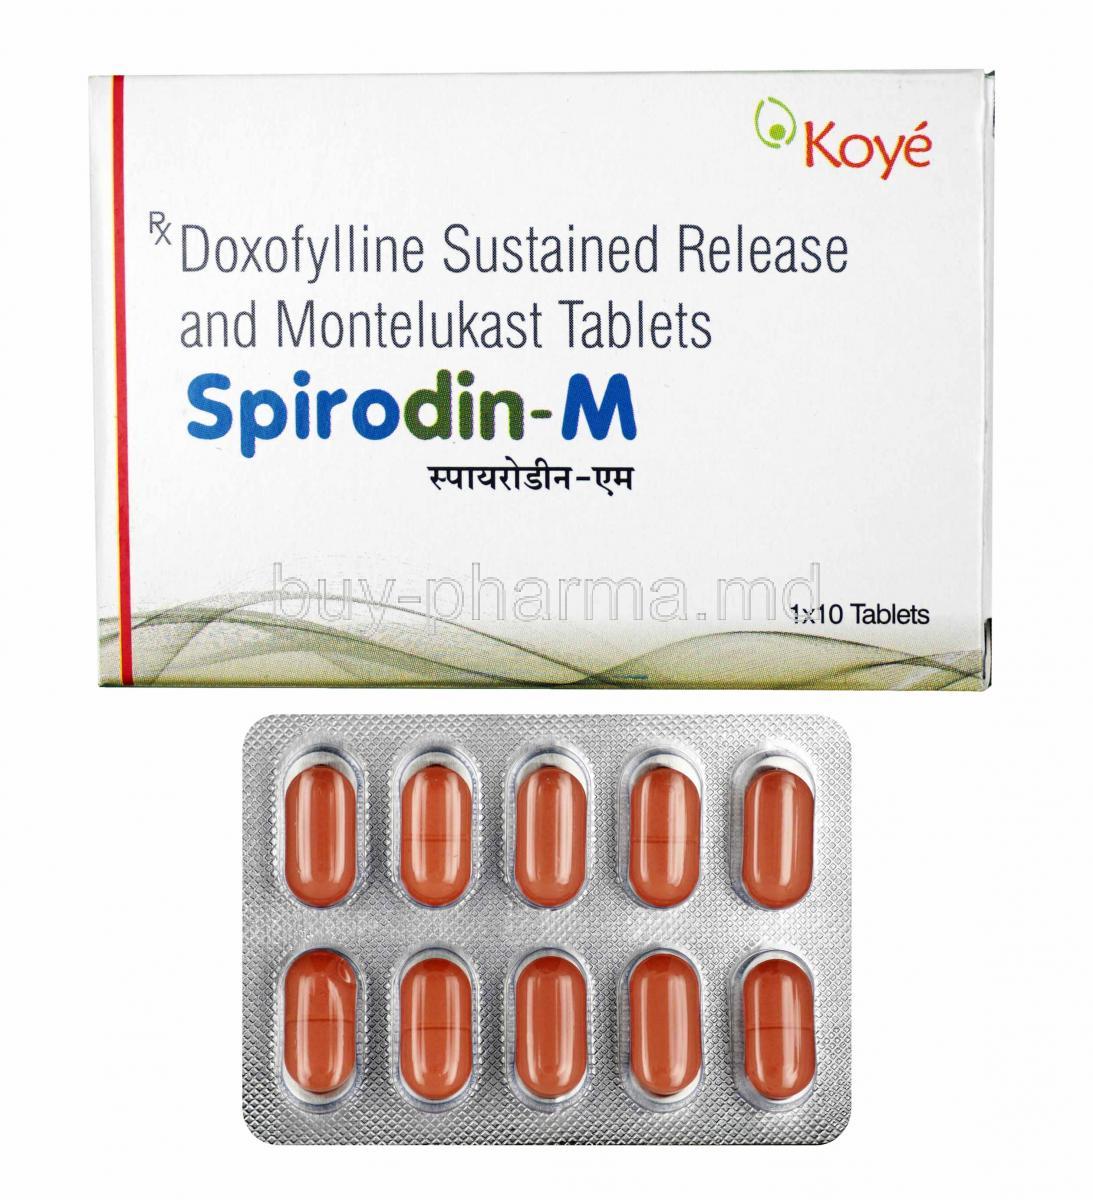 Spirodin-M, Doxofylline and Montelukast box and tablets